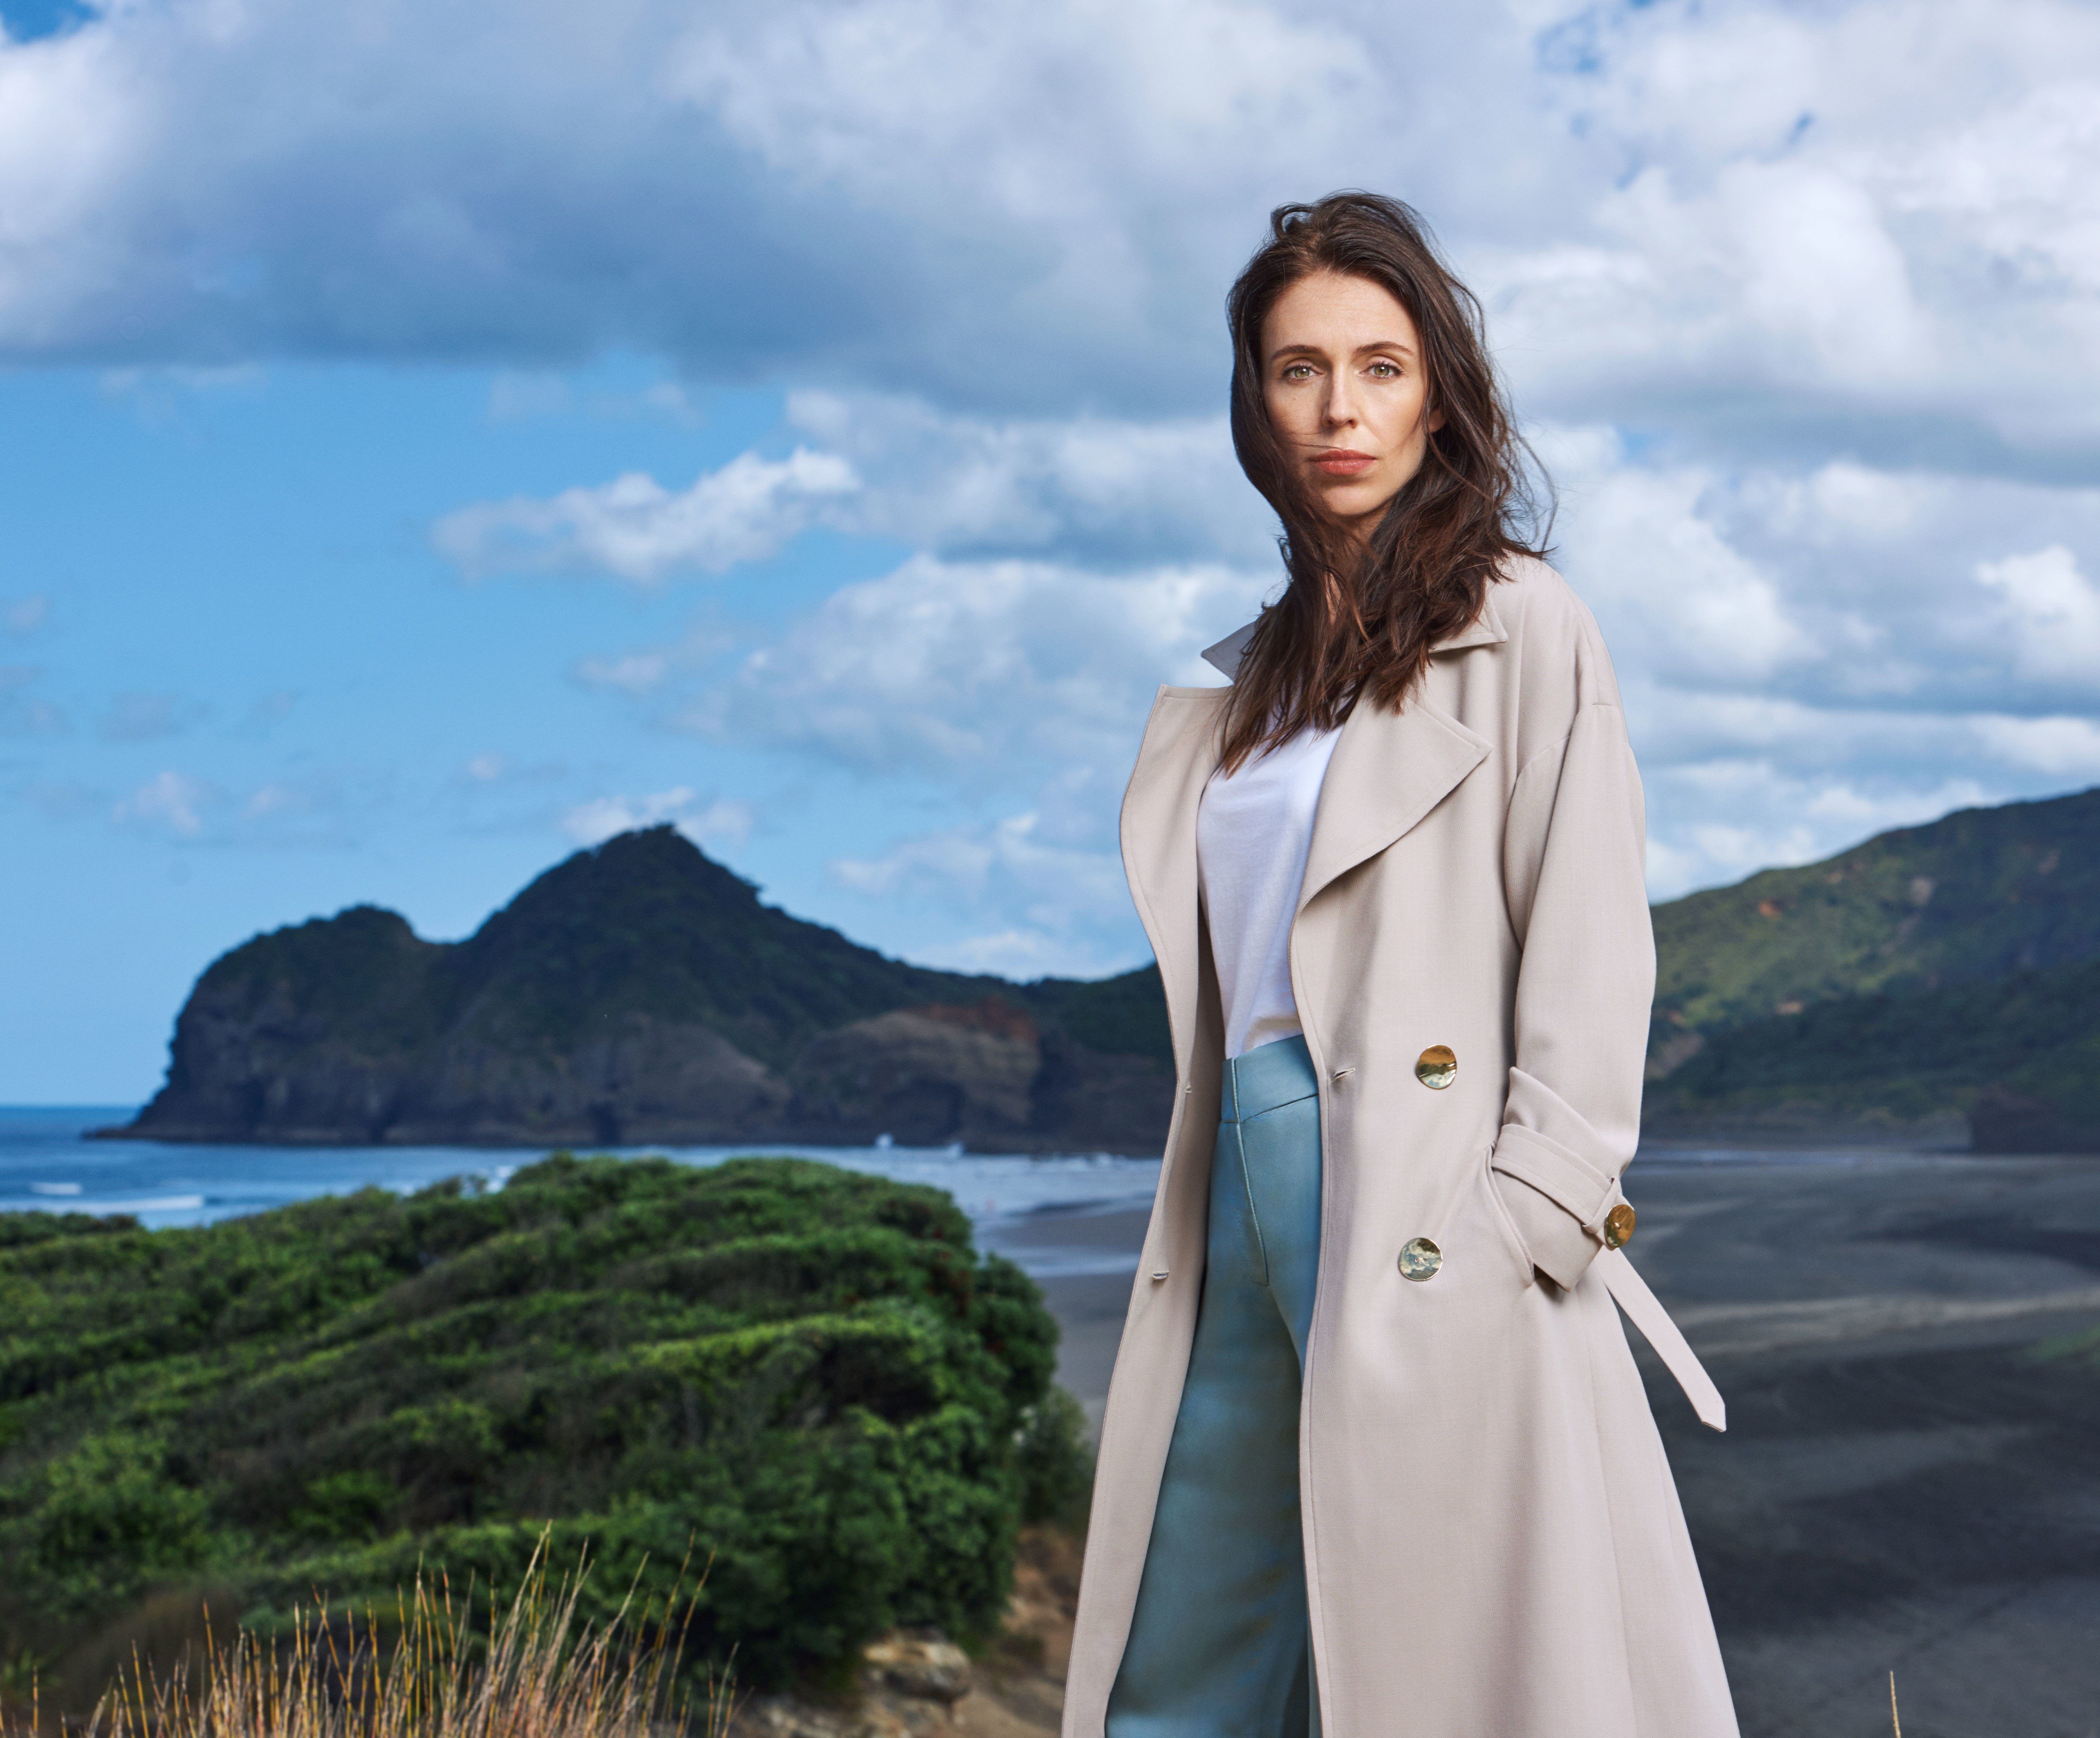 New Zealand's Prime Minister, Jacinda Ardern, Is Young, Forward Looking, And Unabashedly Liberal—Call Her The Anti Trump. Women Leaders, Female, French Girl